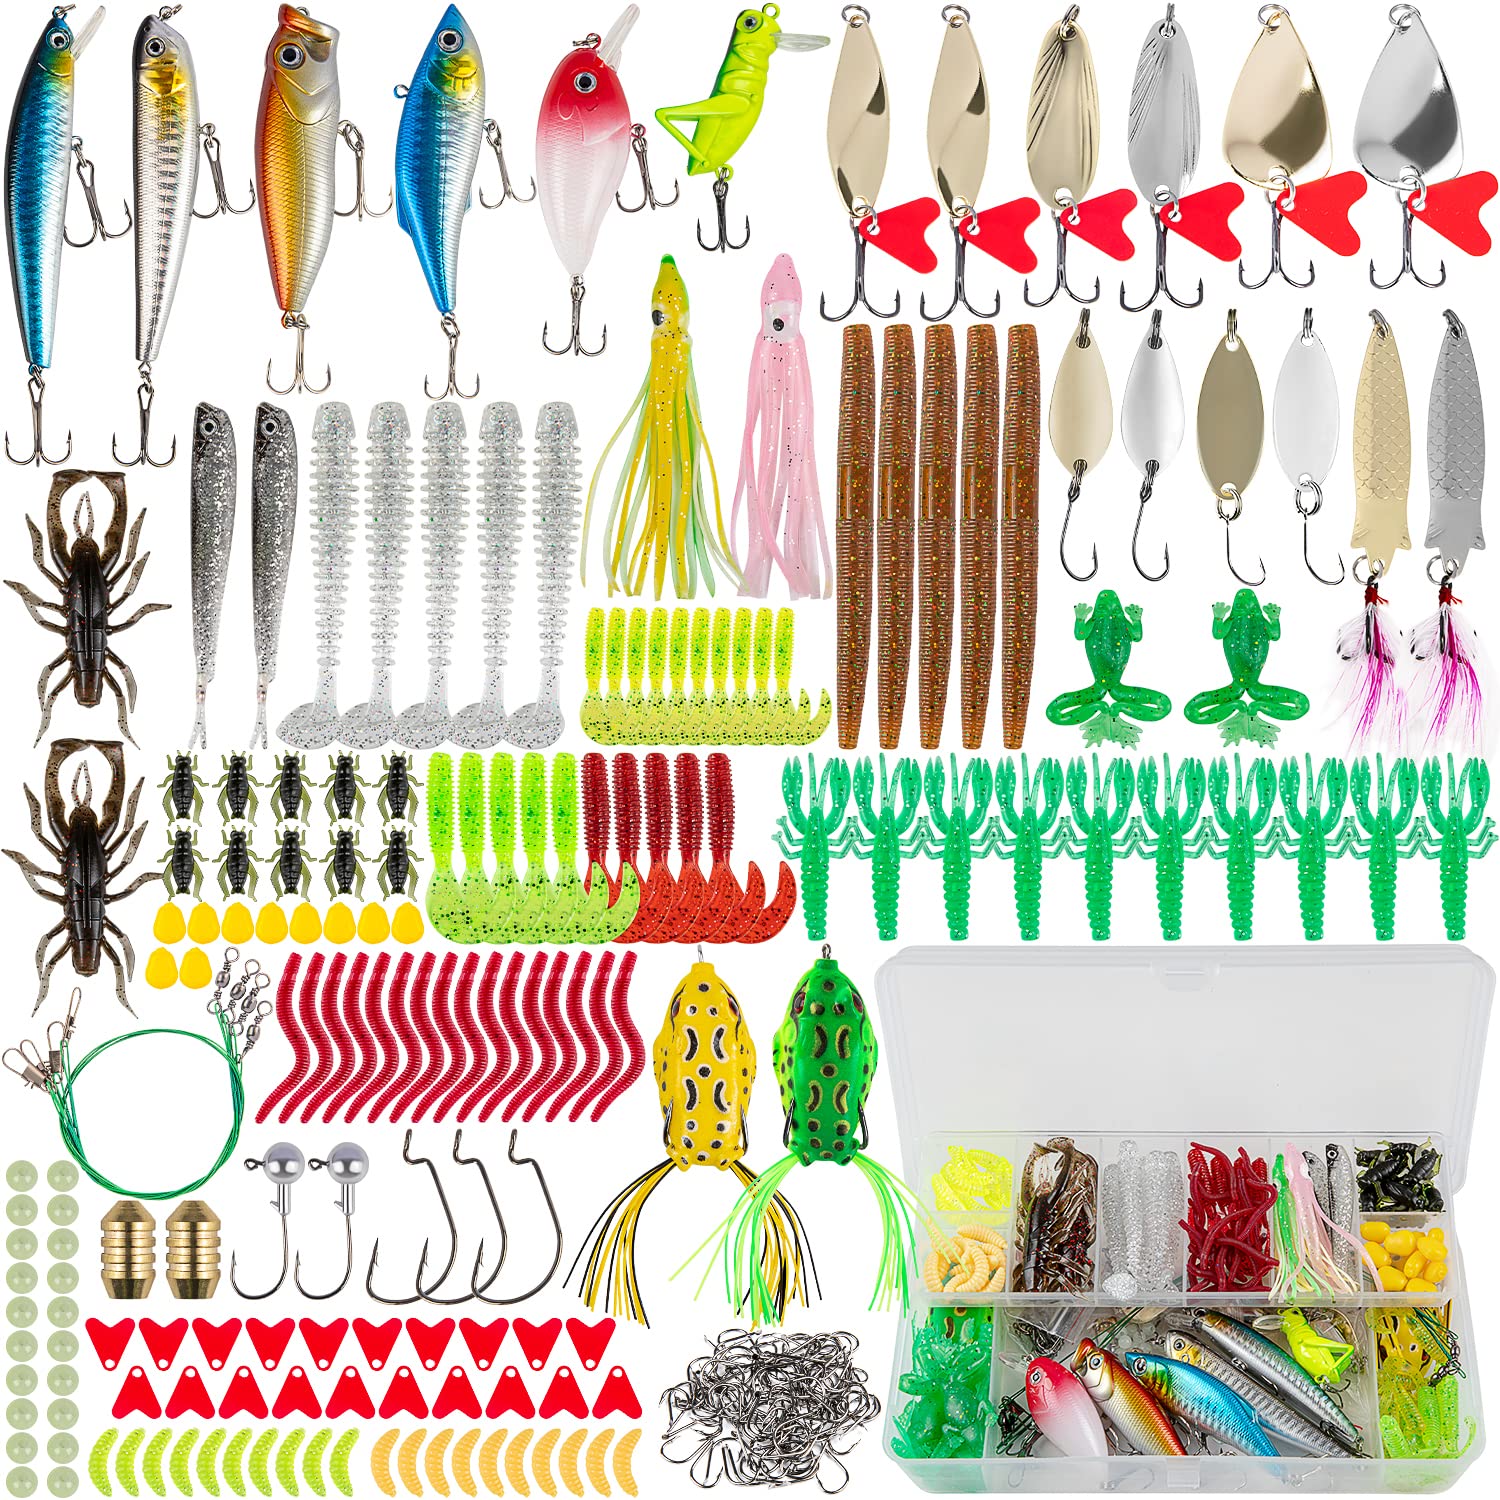 GOANDO Fishing Lures Kit for Freshwater Bait Tackle Kit for Bass Trout  Salmon Fishing Accessories Tackle Box Including Spoon Lures Soft Plastic  Worms Crankbait Jigs Fishing Hooks 380 Pcs Fishing Lures